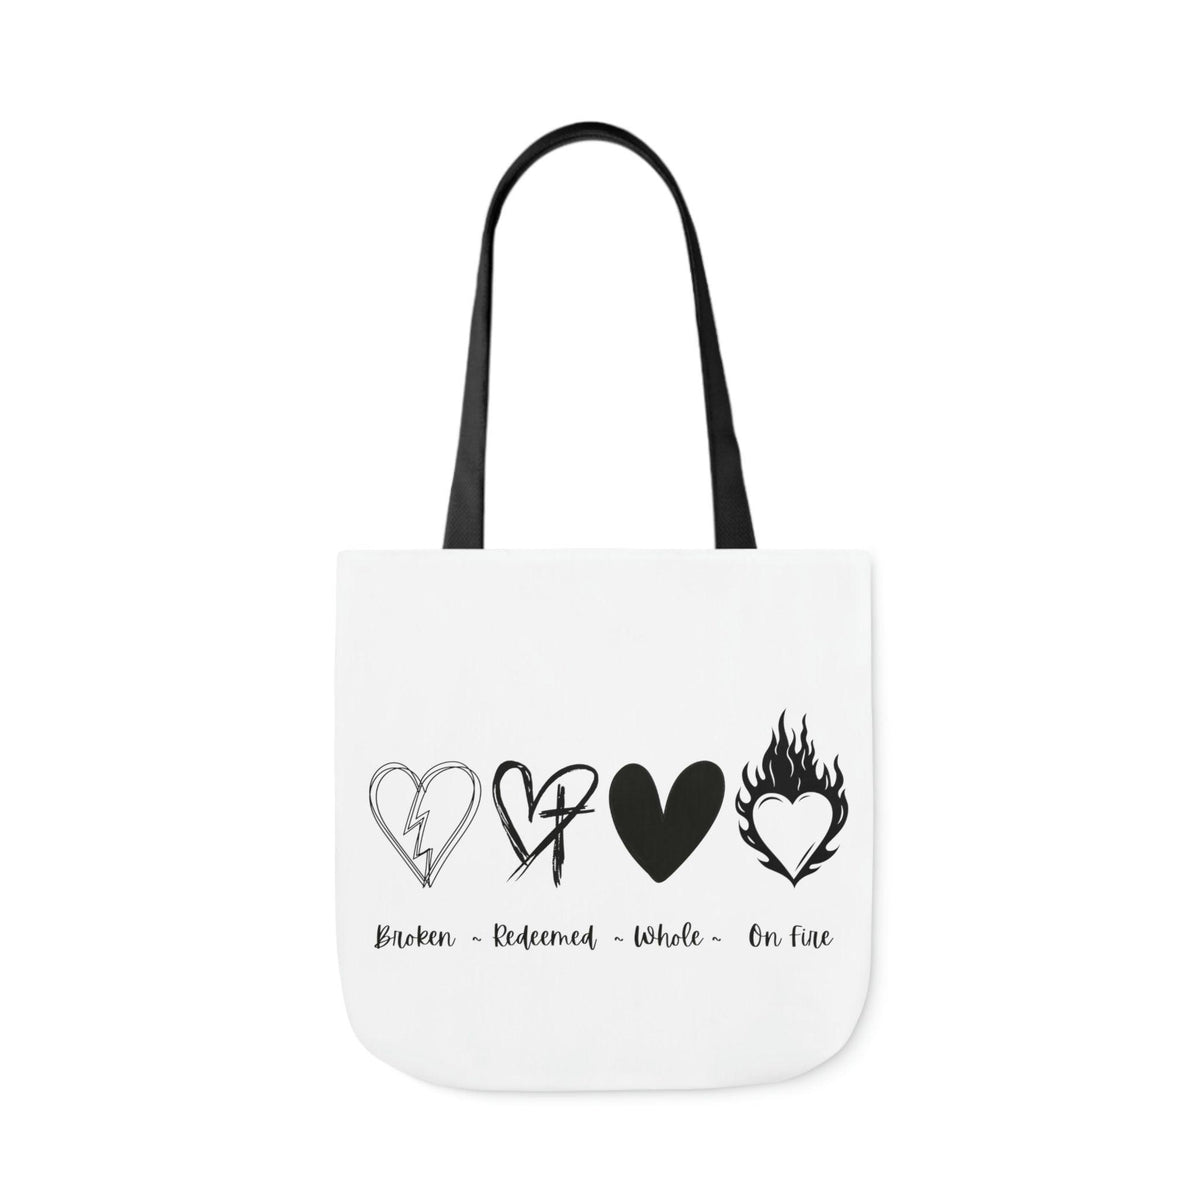 Christian Faith Tote Bag, Gift for Mom, Heart Redeemed Bag, Carryall Tote Bag for Beach, Bag for Pool, Shopping Tote Bag, Bible Carry Bag - The Ripple Effect Co.US